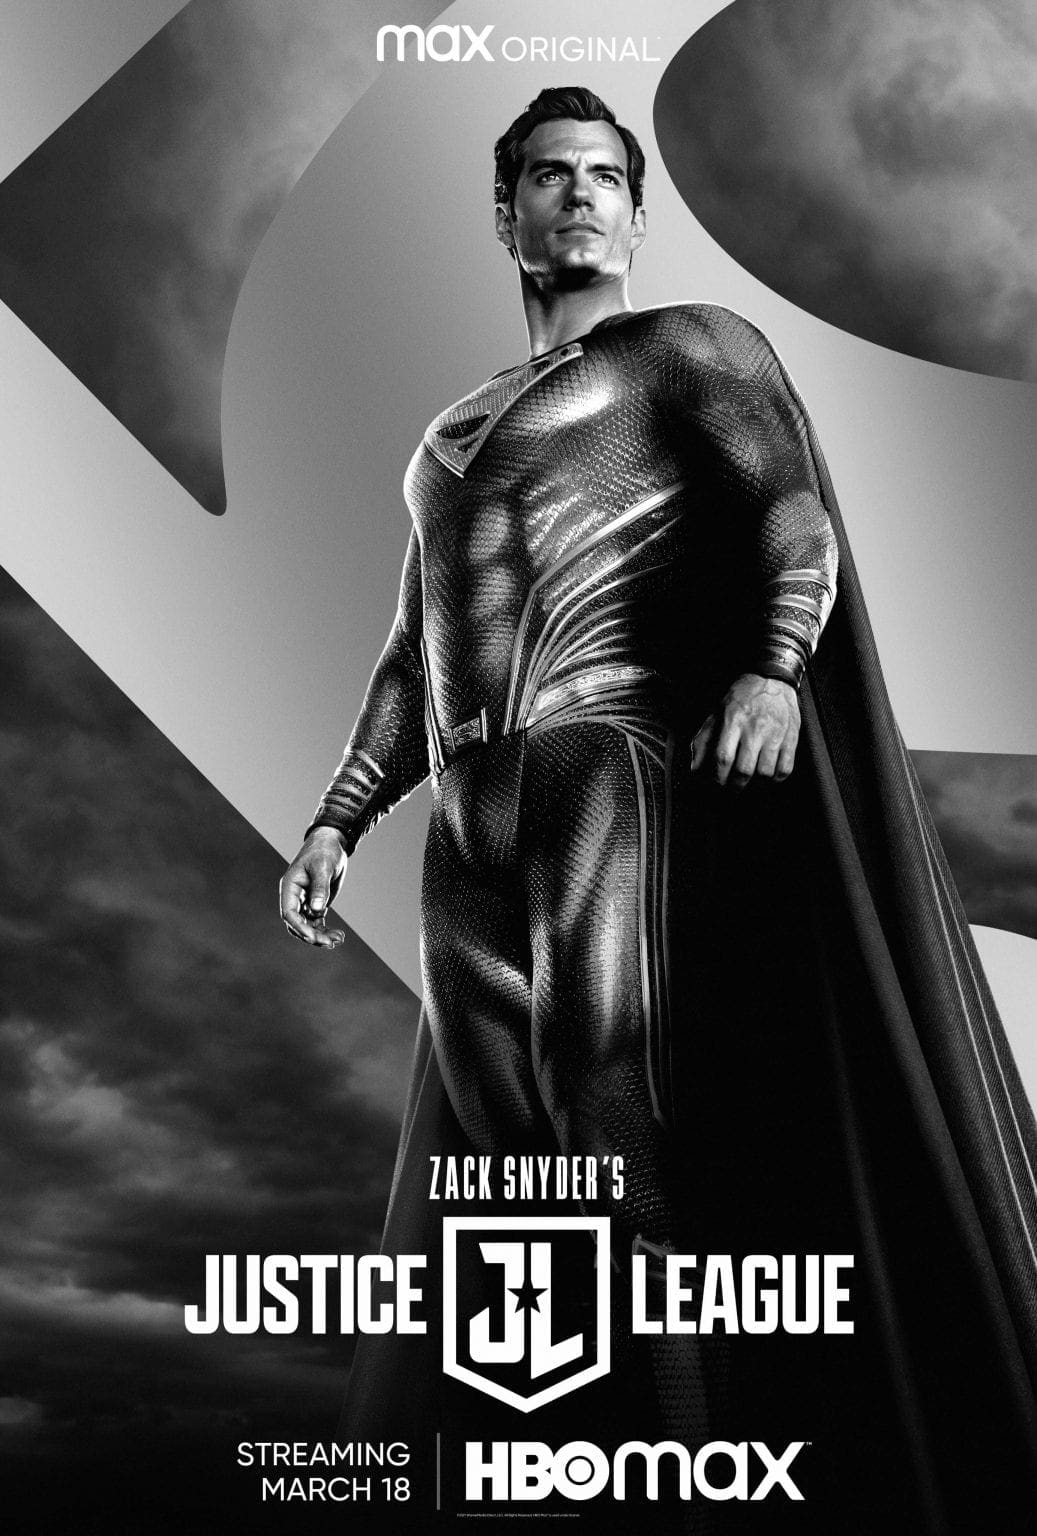 download justice league the death and return of superman